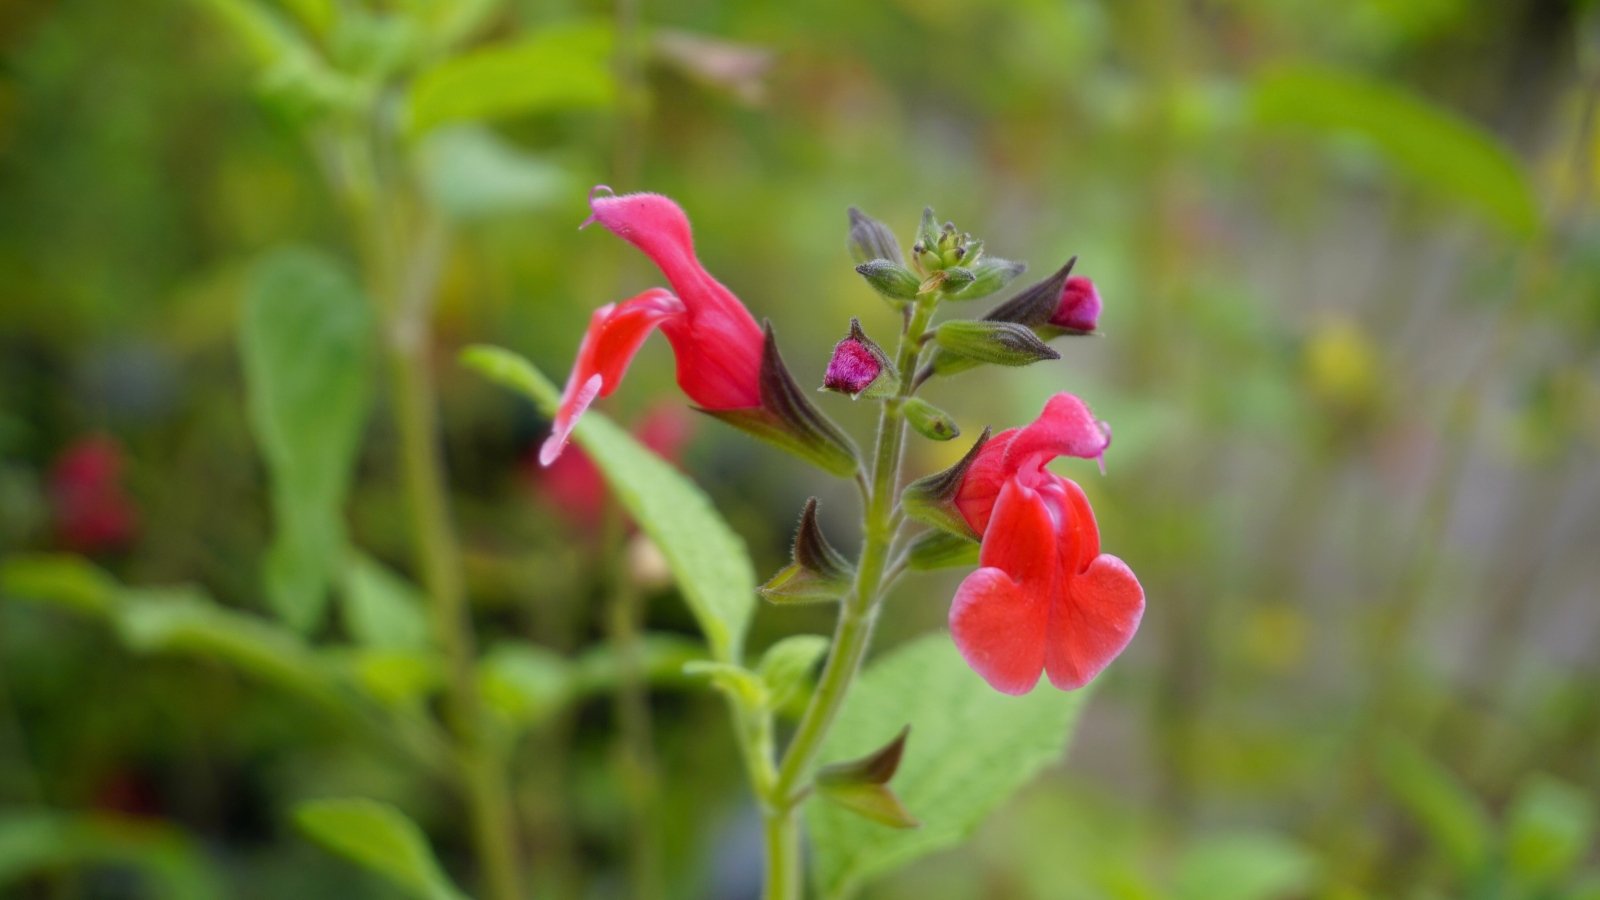 Closeup of red flowers of Salvia greggii on tall stems covered with small, lance-shaped green leaves.